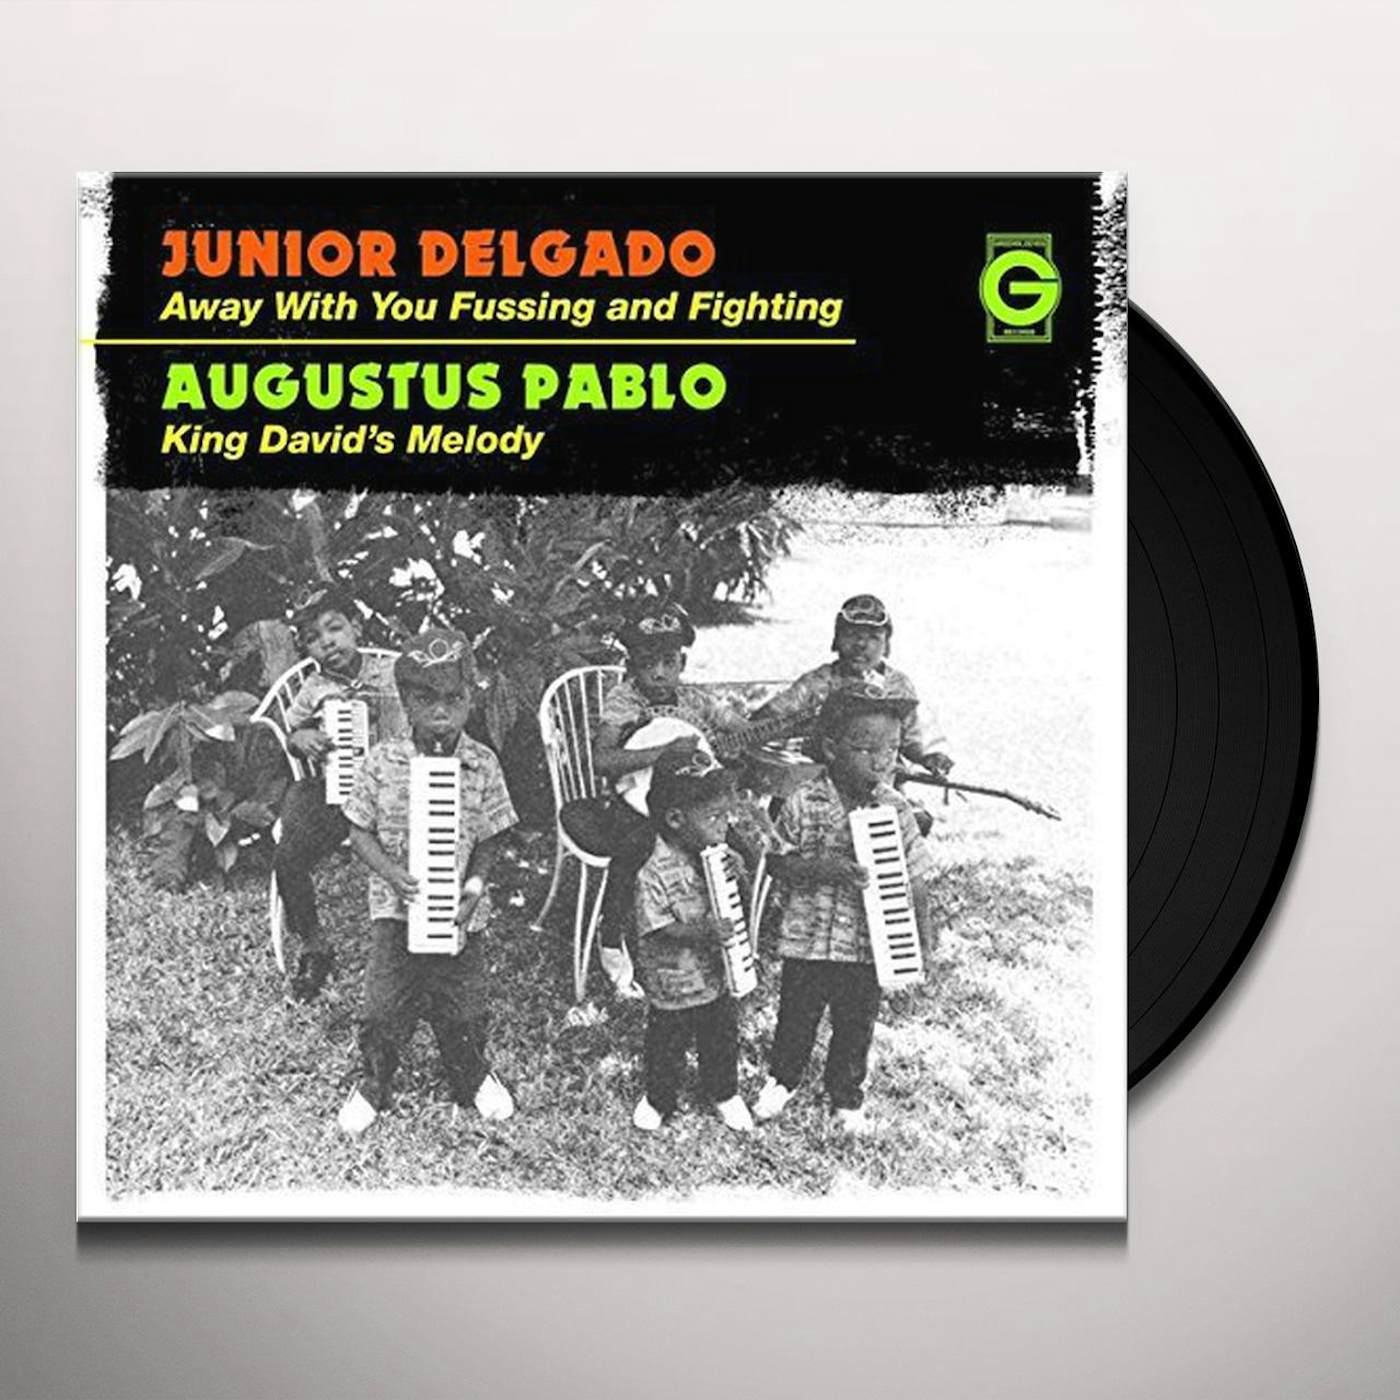 Junior Delgado AWAY WITH YOU FUSSING AND FIGHTING Vinyl Record